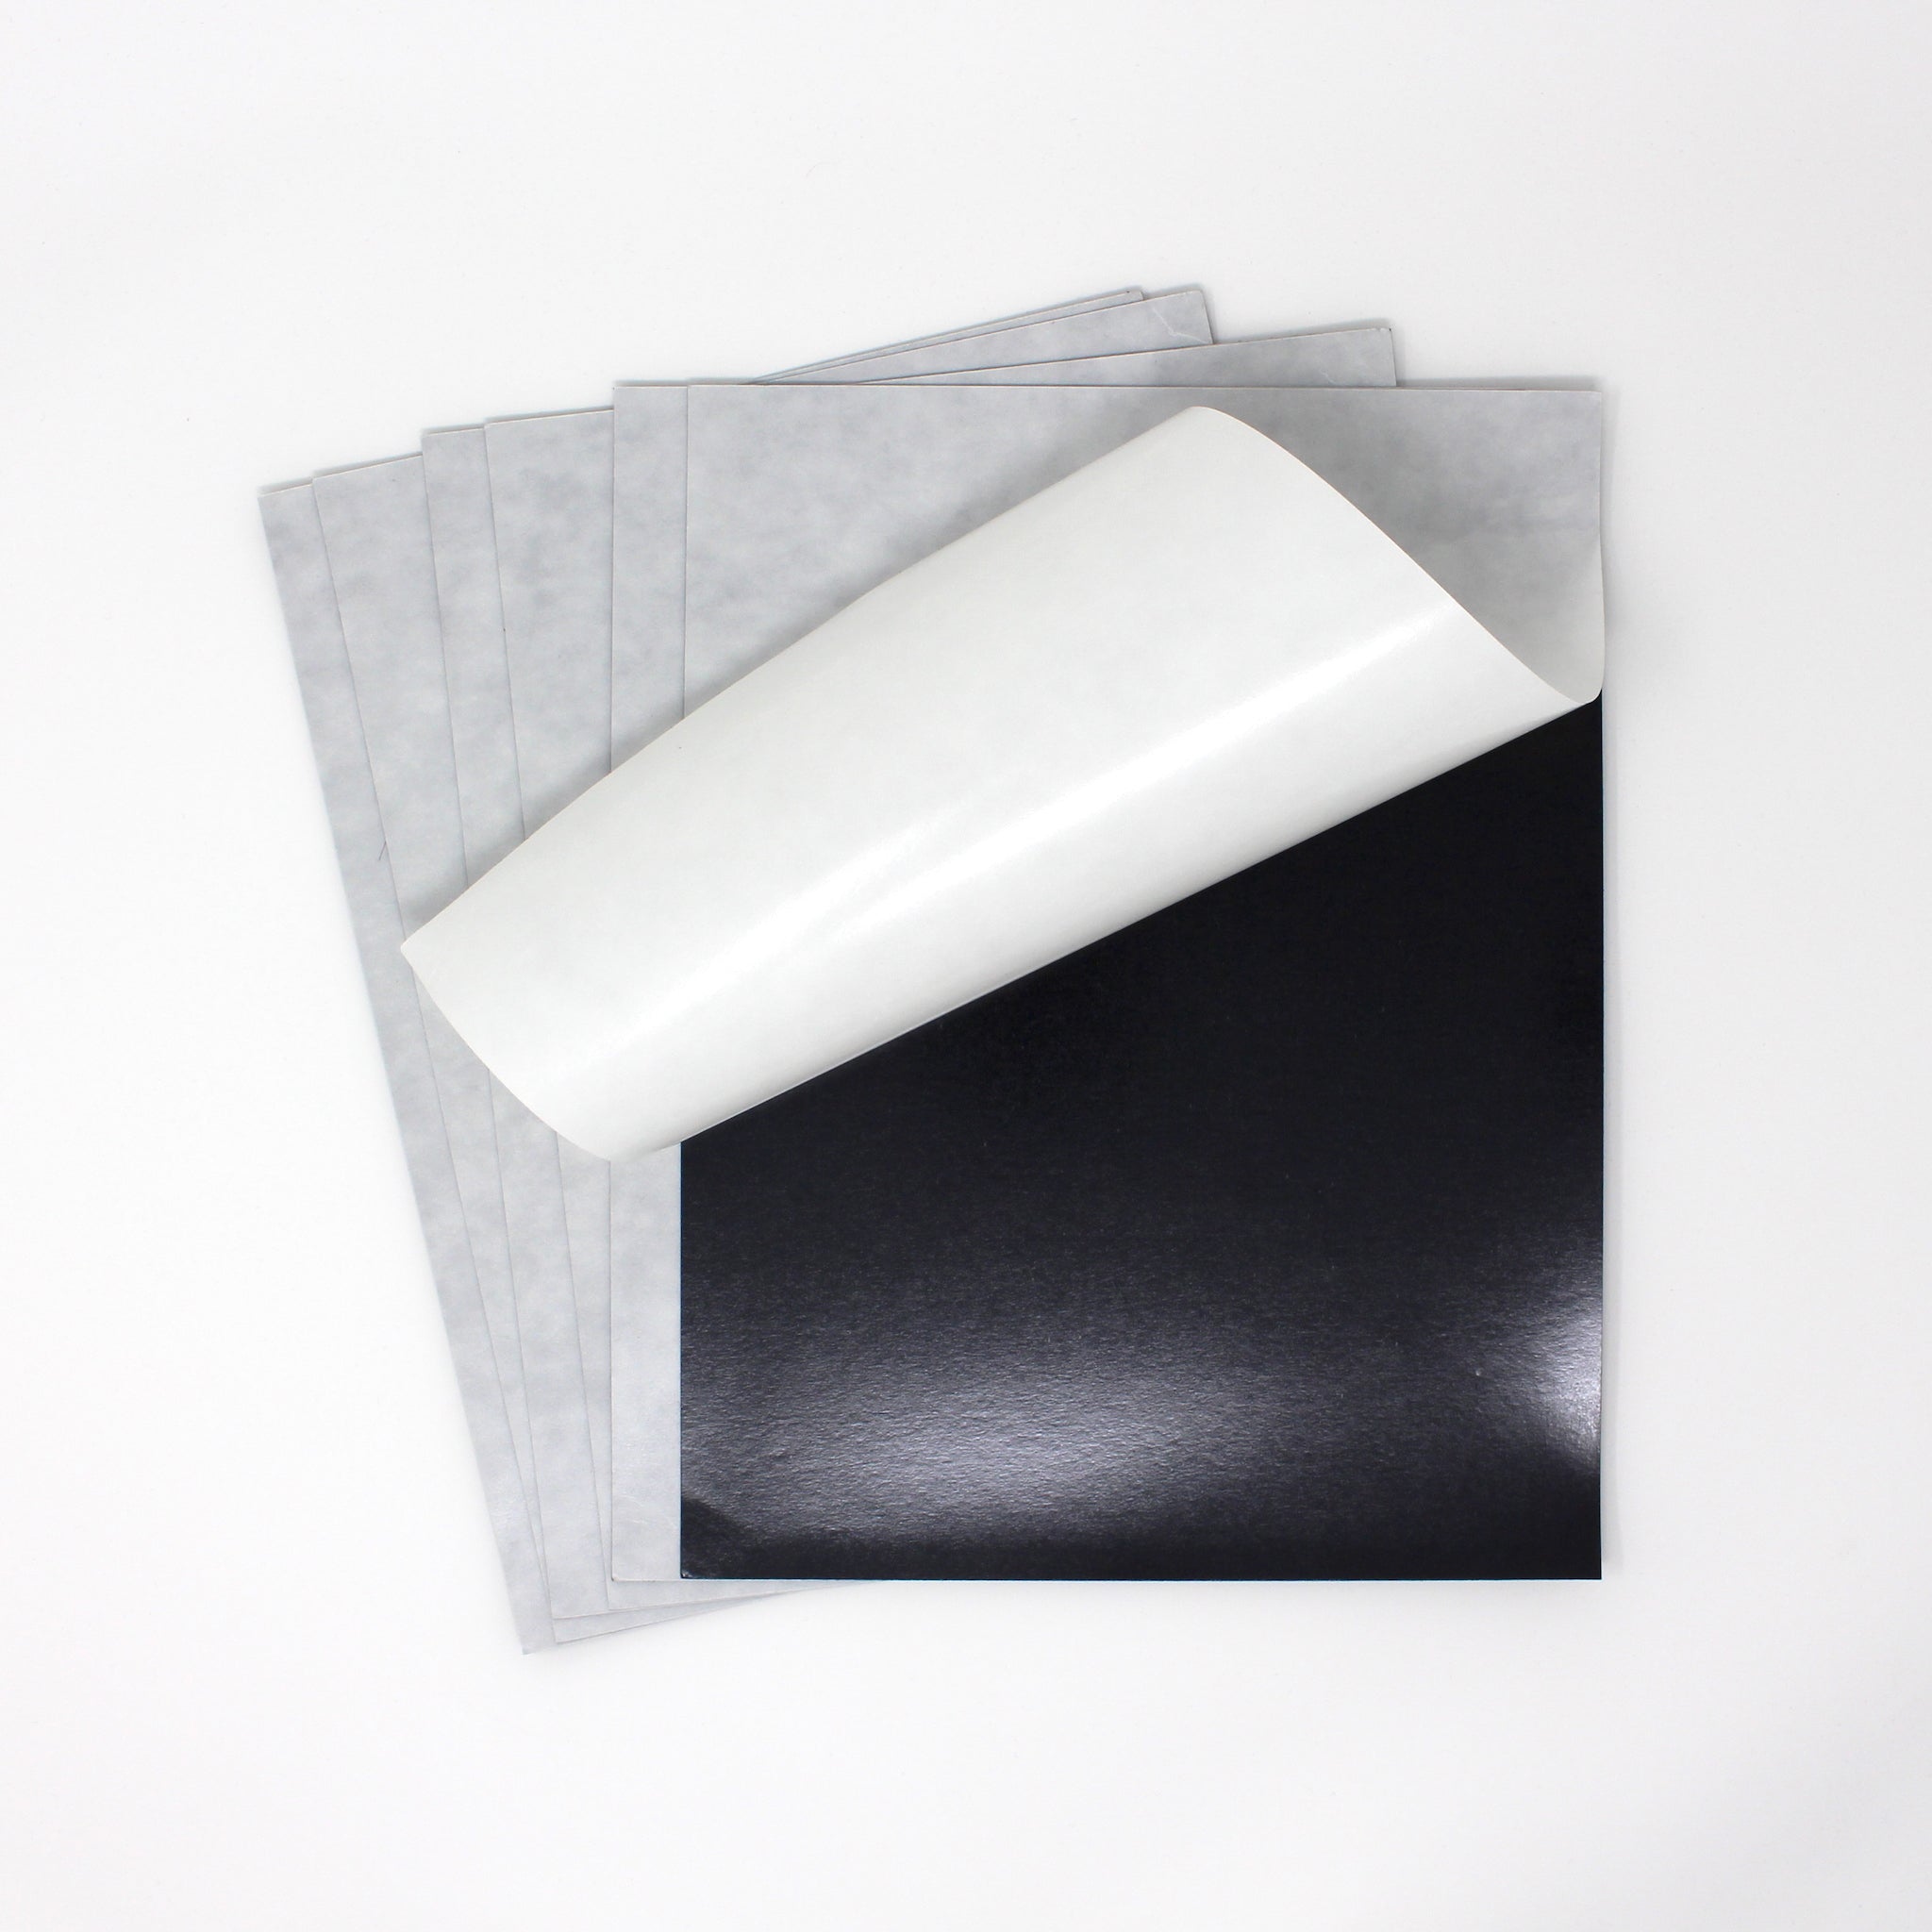 Adhesive Magnetic Sheets